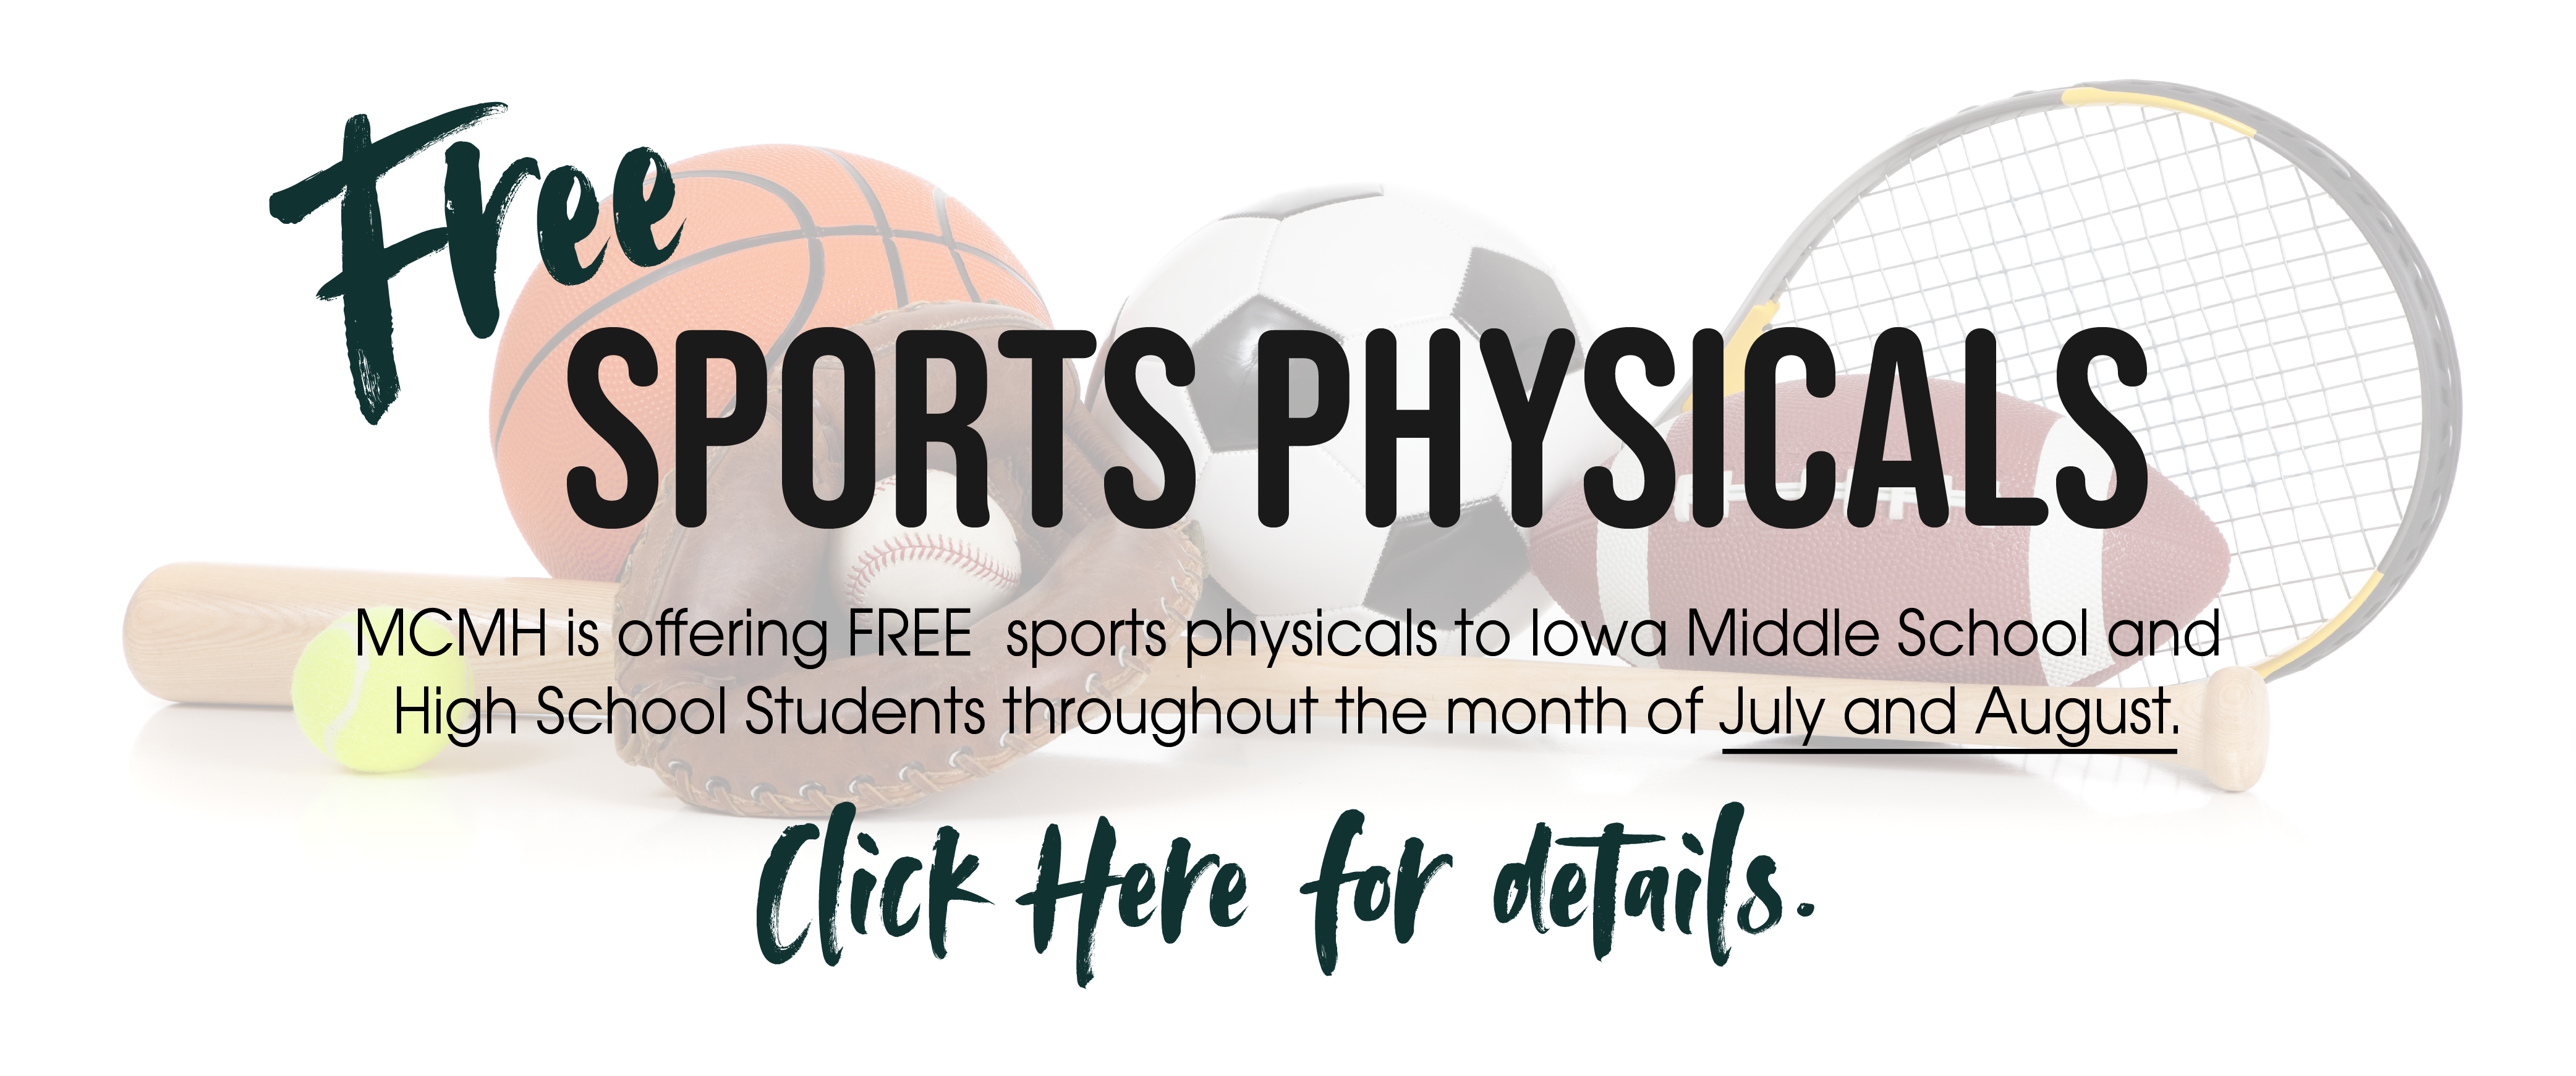 Banner picture of a faded background sports equipment. There is a basketball, soccer ball, baseball, baseball glove, football, tennis ball, tennis ball racket , football, and a bat. Banner says:

Free SPORTS PHYSICALS

MCMH is offering FREE sports physicals to Iowa Middle School and High School Students throughout the month of July and August.

Click Here for details.